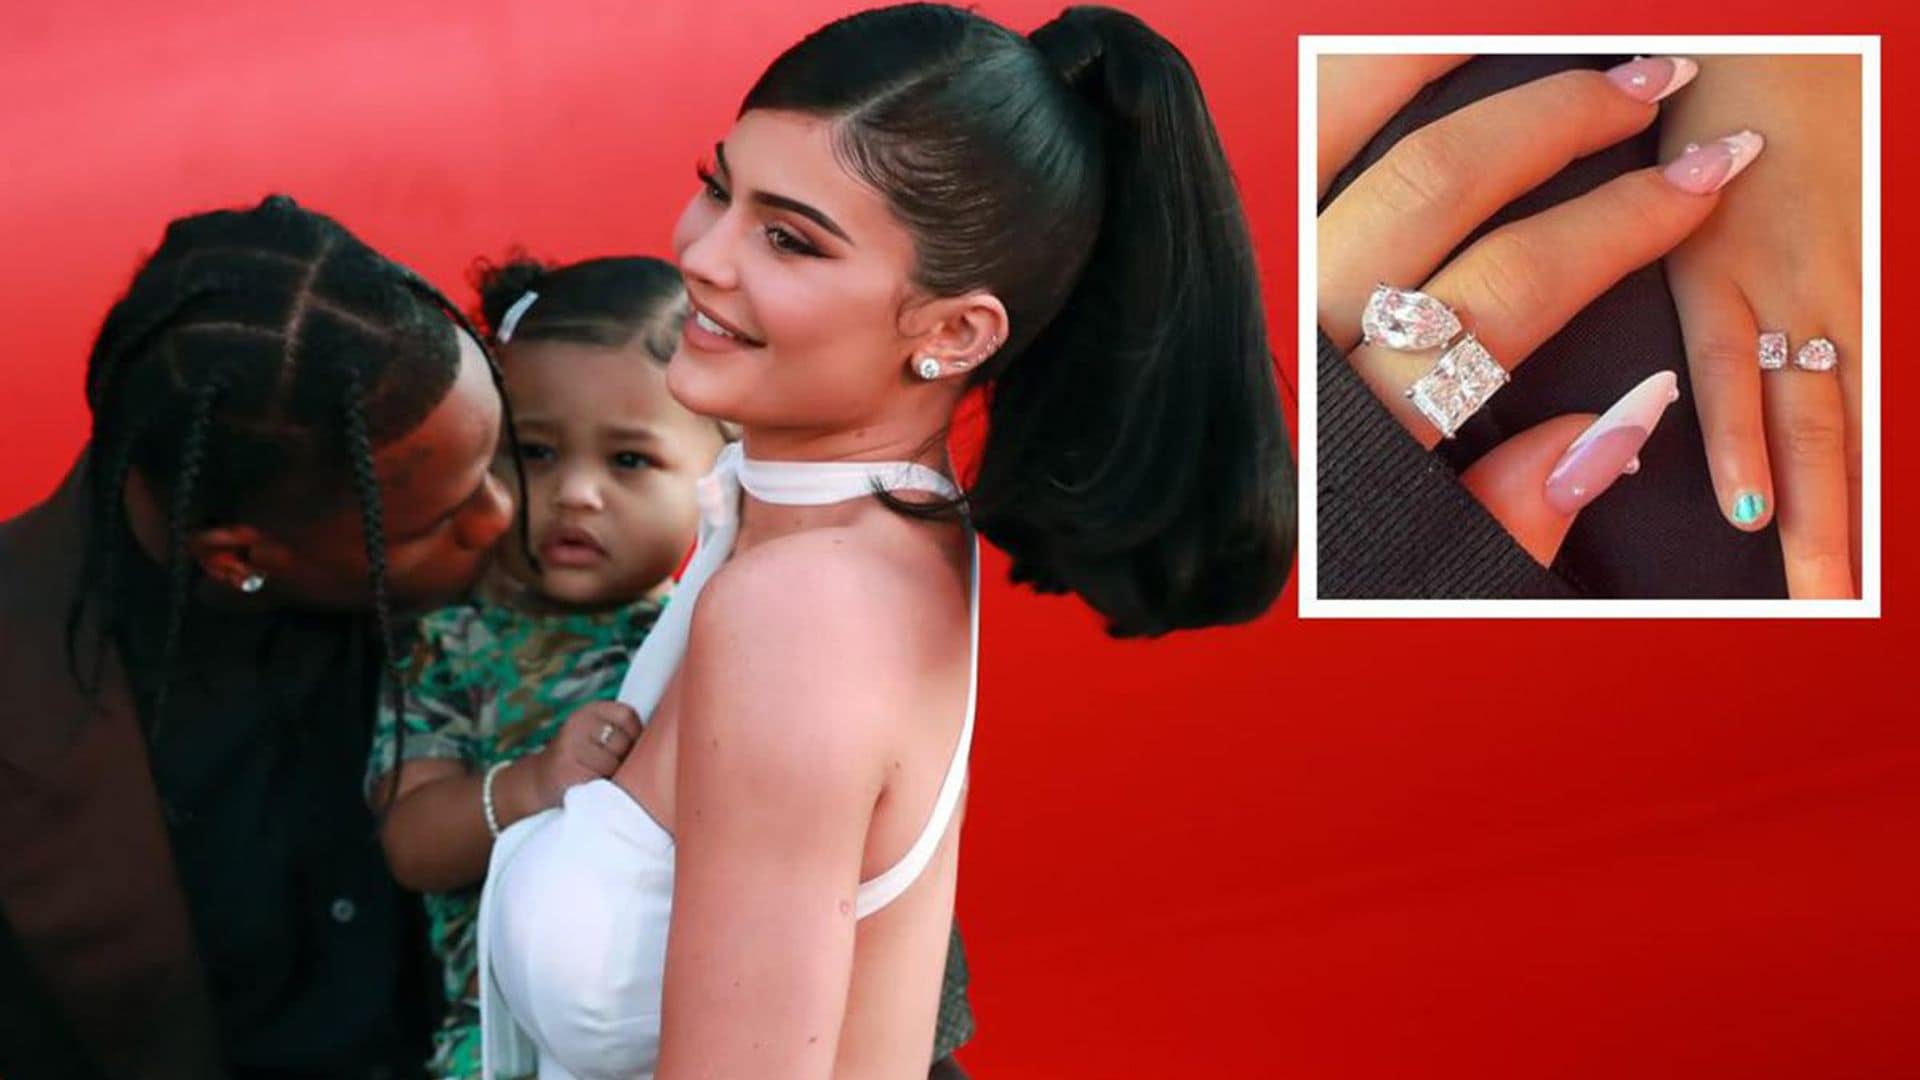 Kylie Jenner and Stormi now have matching diamond rings thanks to daddy Travis Scott